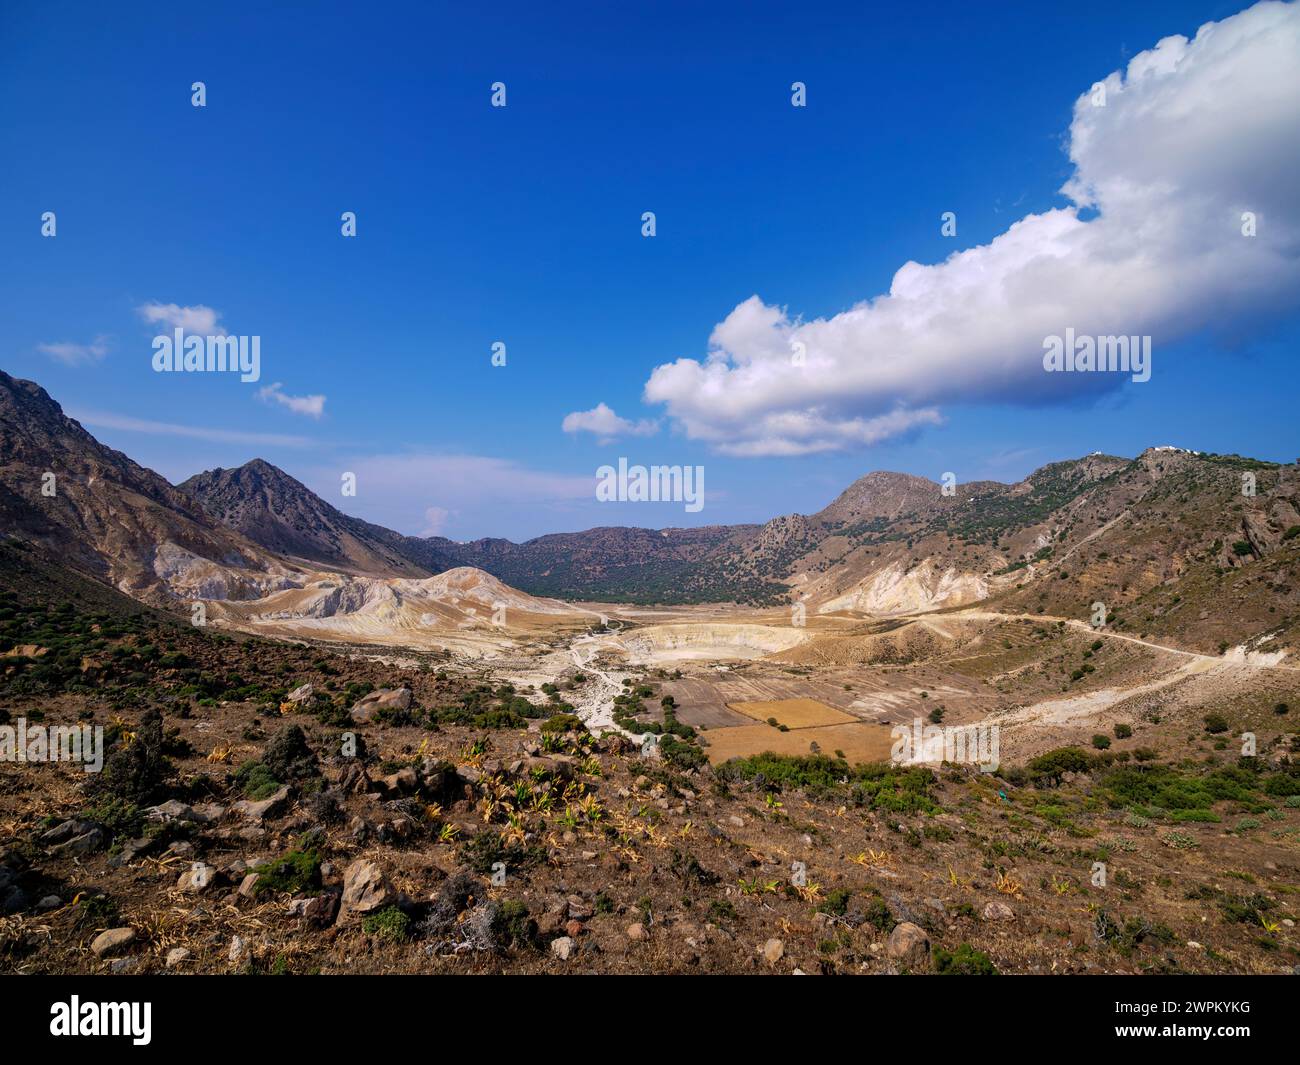 View towards the Stefanos Volcano Crater, Nisyros Island, Dodecanese, Greek Islands, Greece, Europe Stock Photo